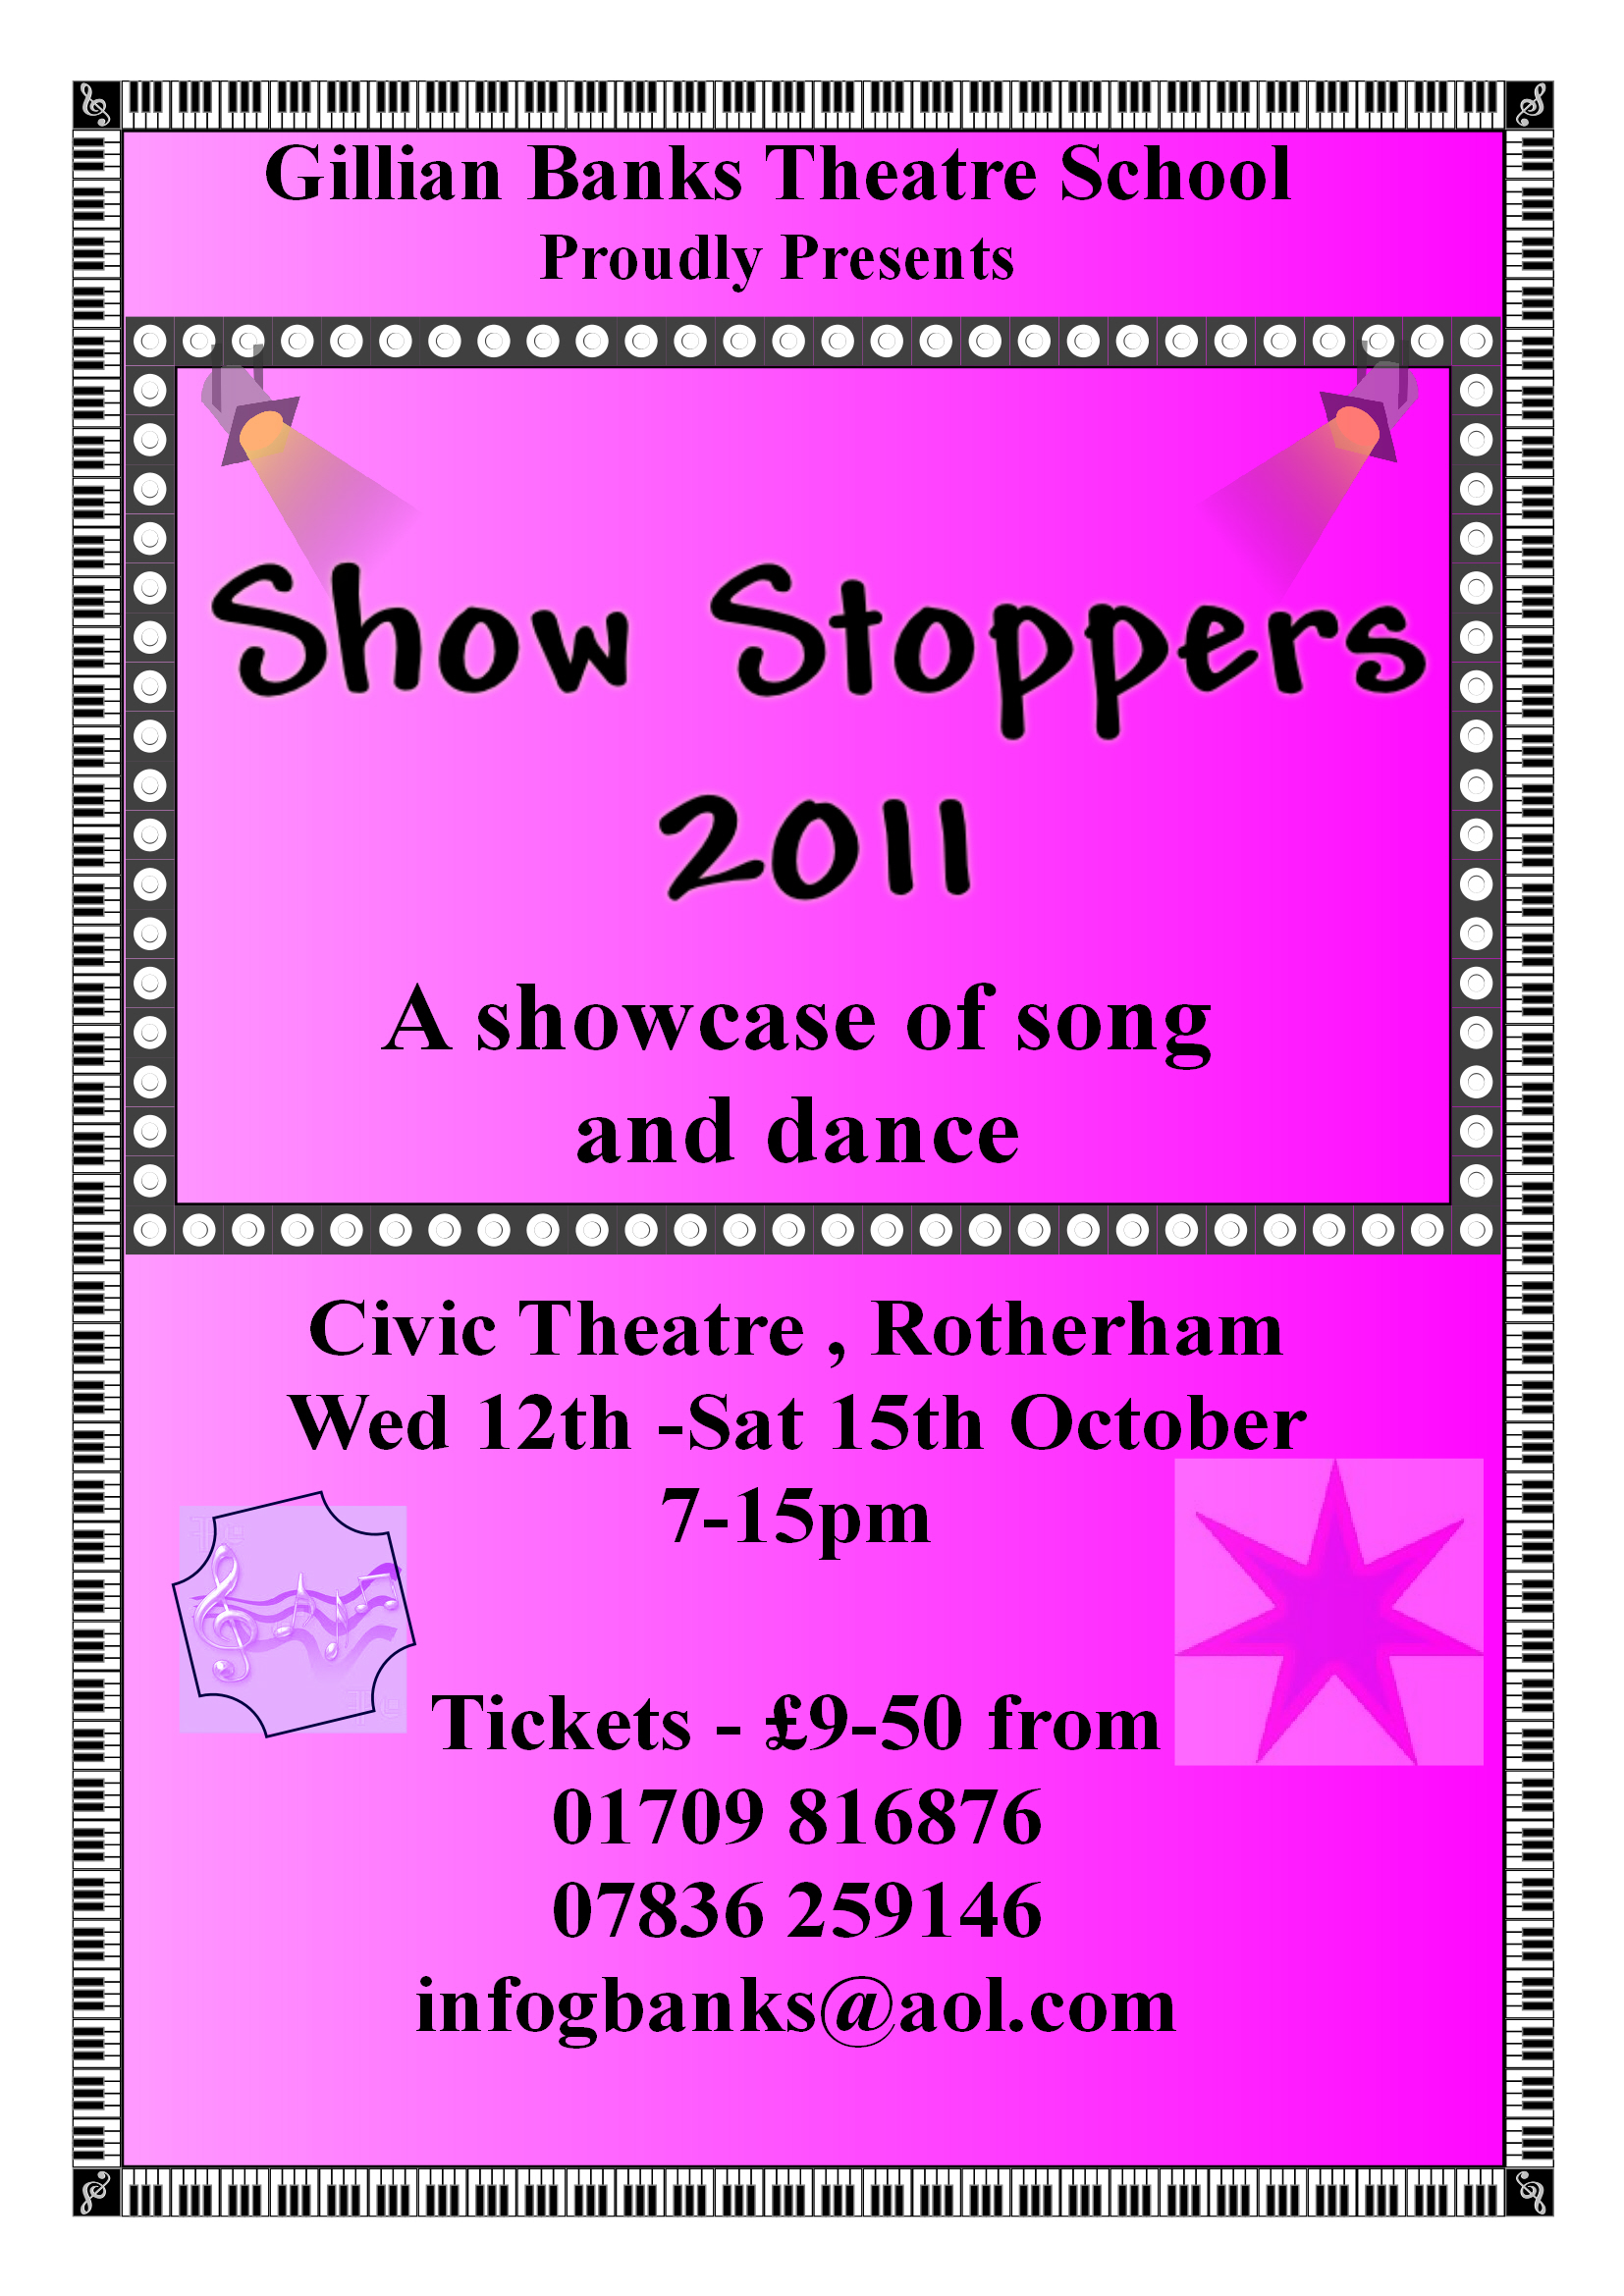 Showstoppers 2011 Poster